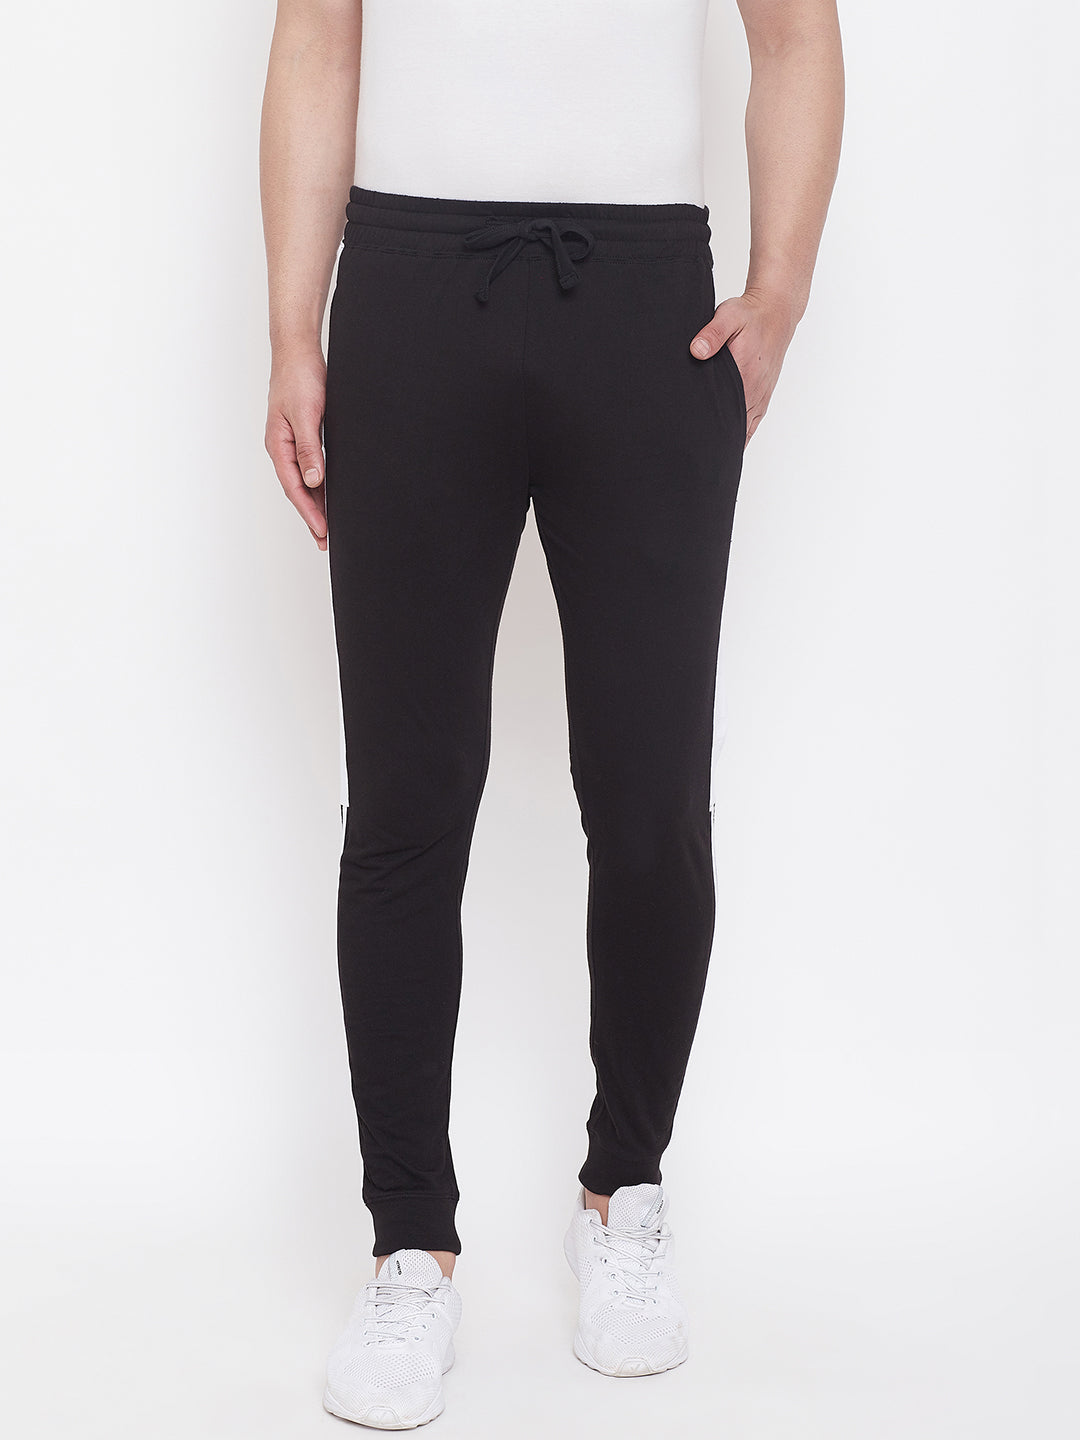 Black/White Mid - Rise Slim Fit Joggers With Color Block